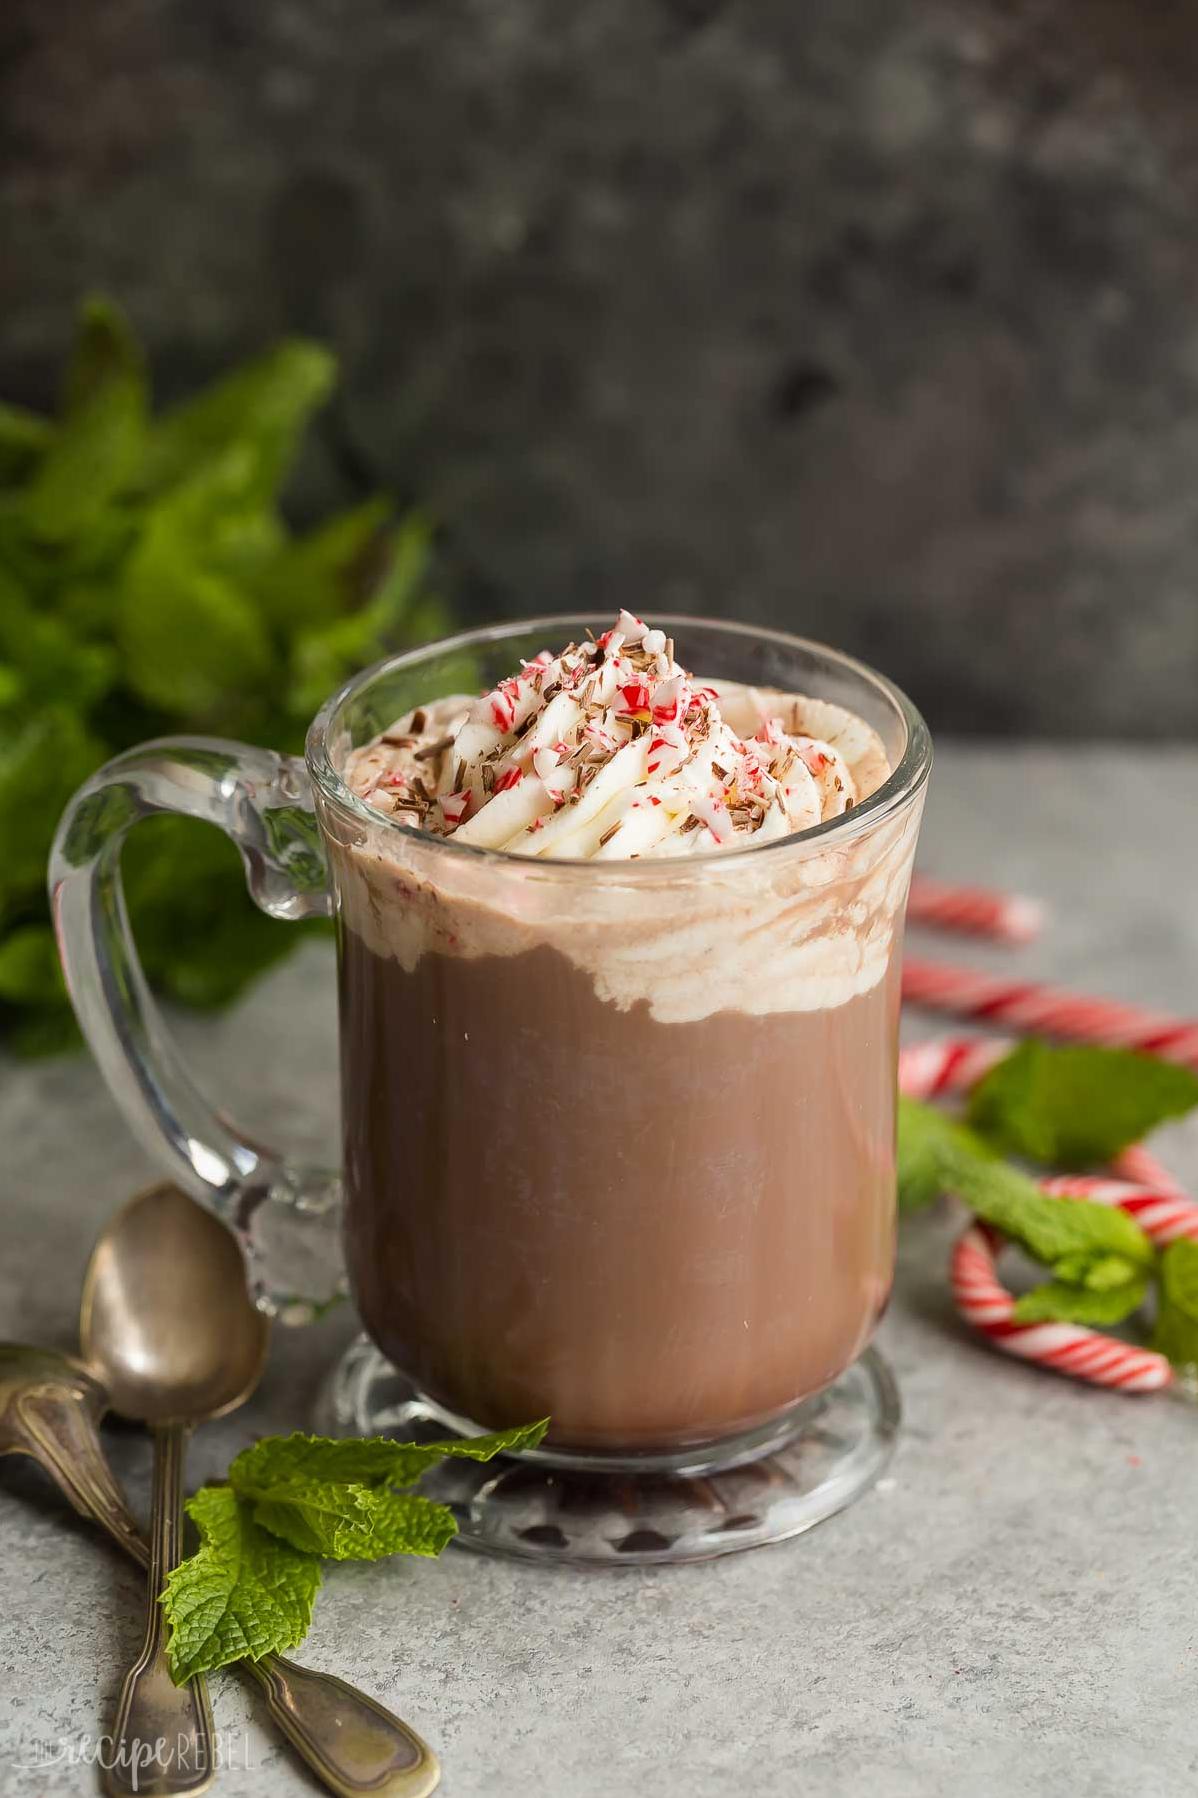  Say goodbye to boring coffee and hello to this delicious mint chocolate concoction. 🙌